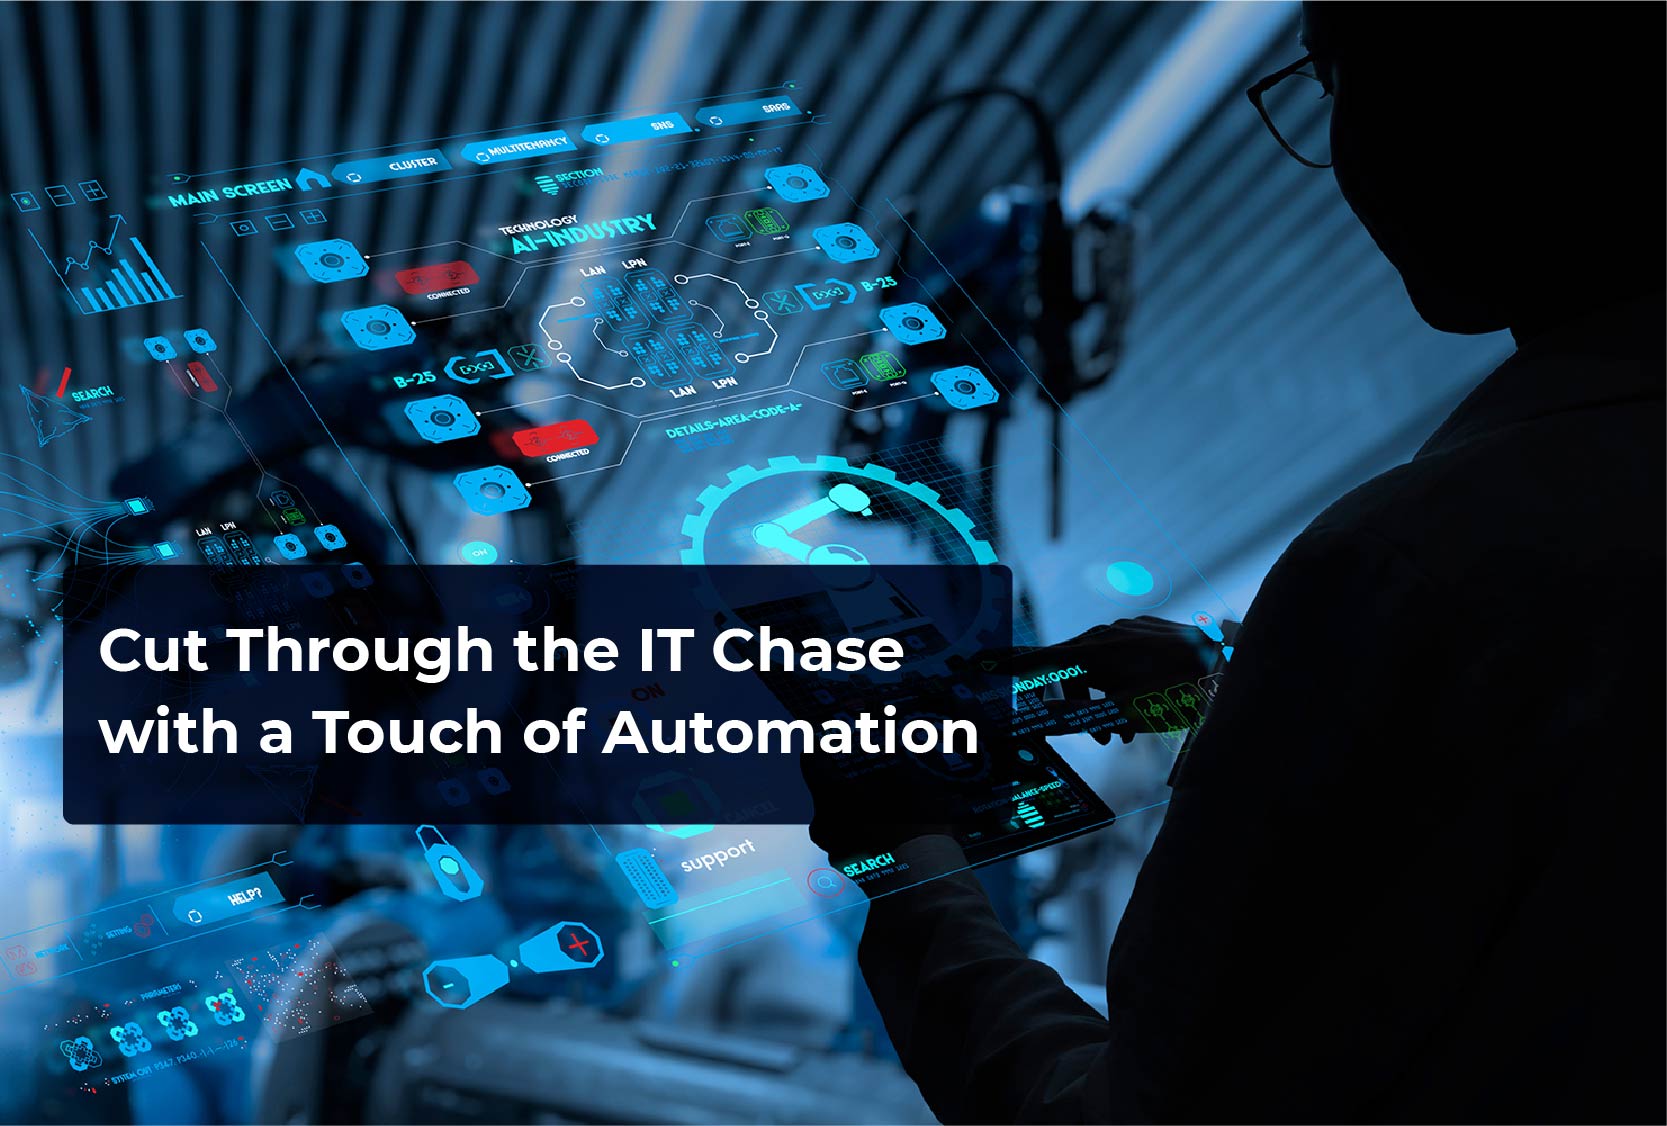 Cut Through the IT Chase with a Touch of Automation